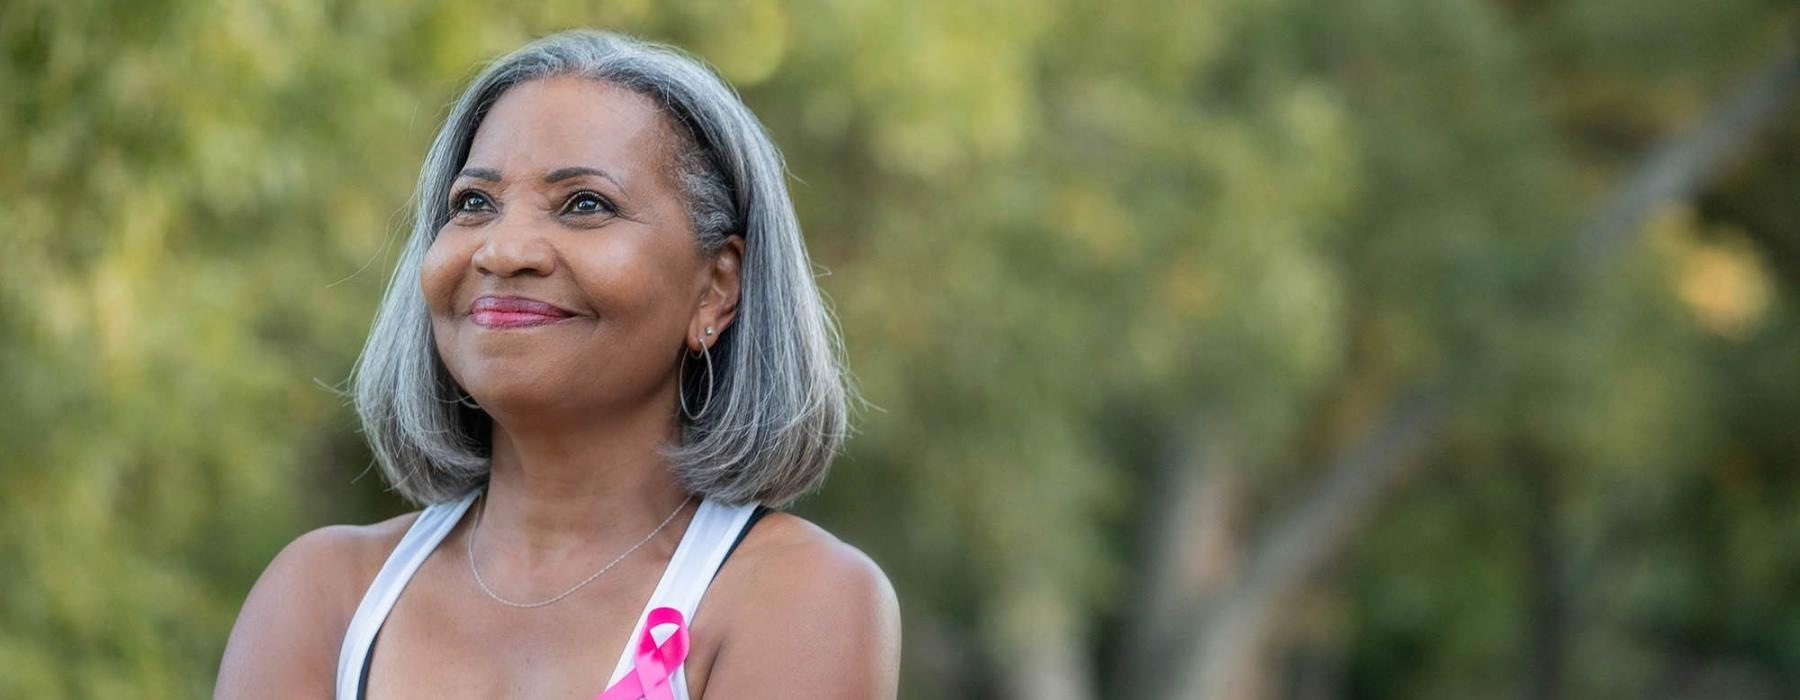 a woman with grey hair smiles to herself in neighborhood park